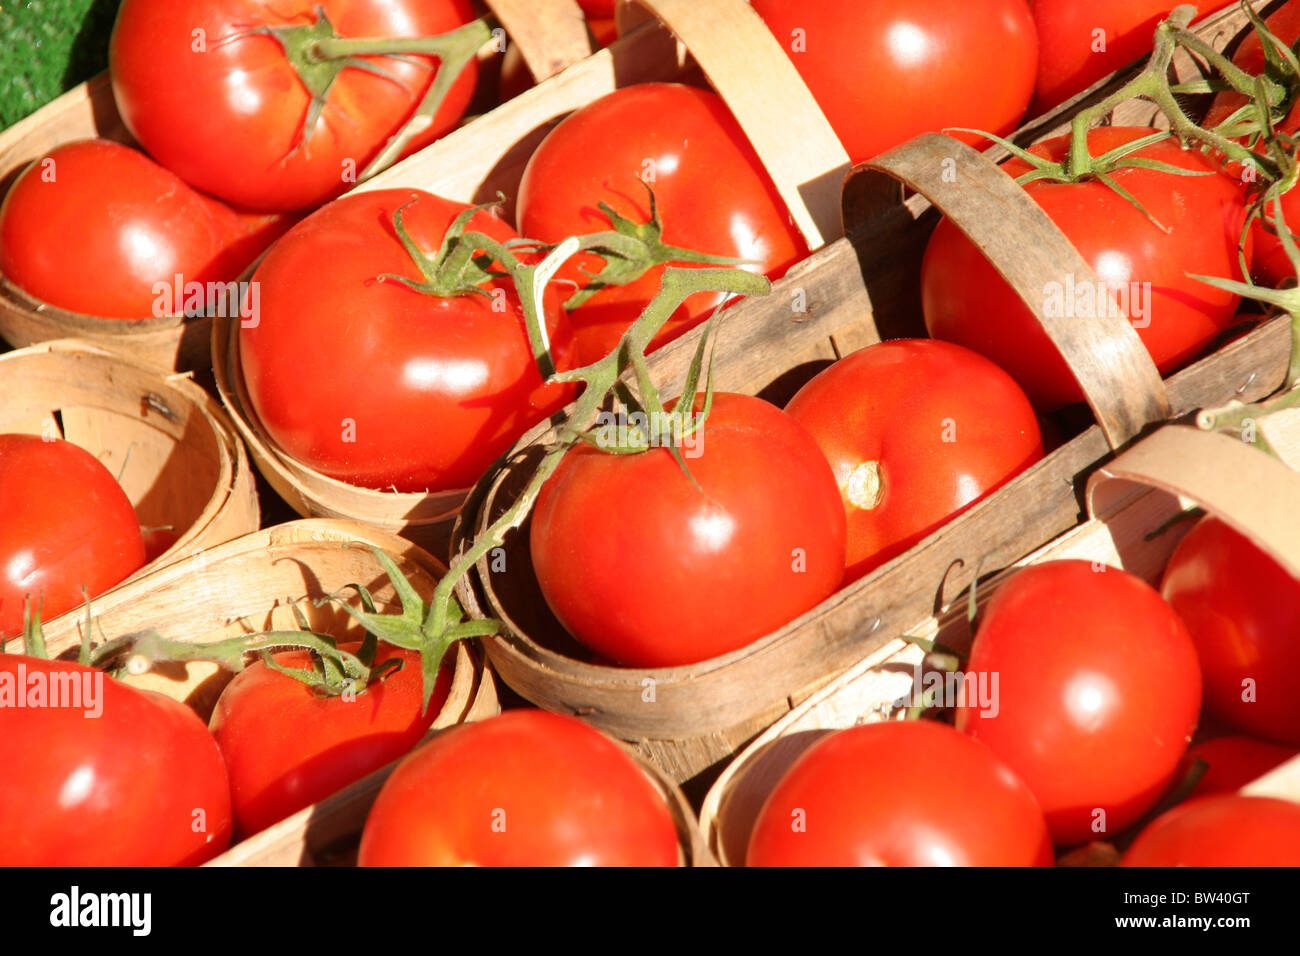 Multiple baskets of vine tomatoes Stock Photo